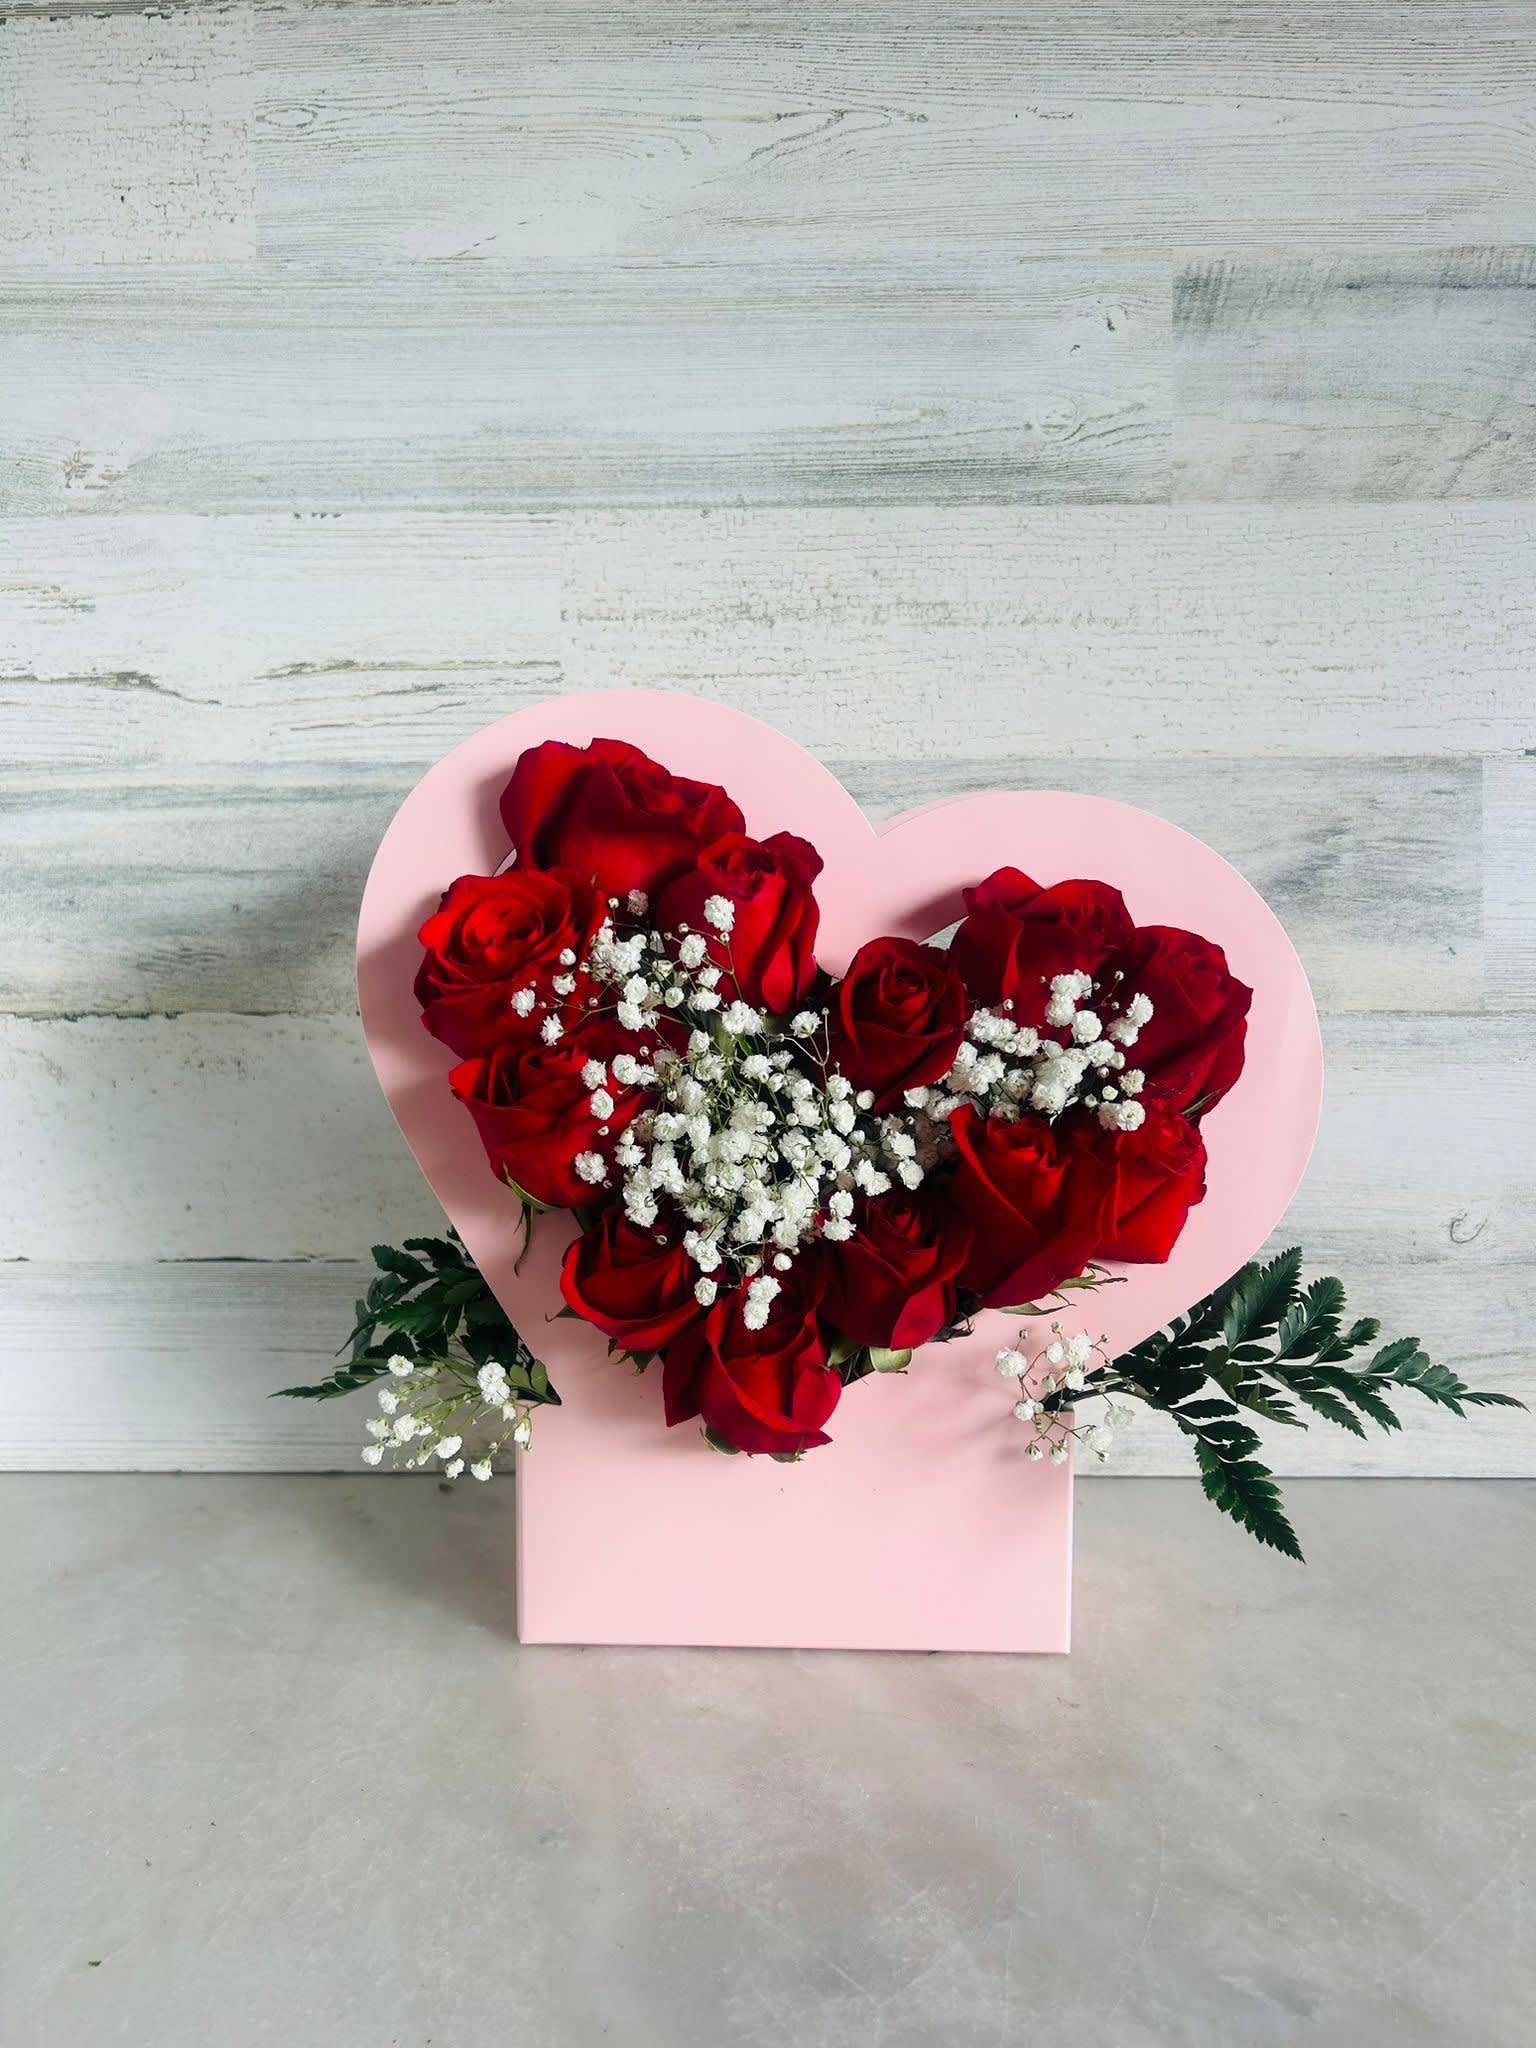 PRETTY HEART - NICE, MODERN AND UNIQUE ROSES ARRANGEMENT IN A HEART SHAPE BOX AND ROSES